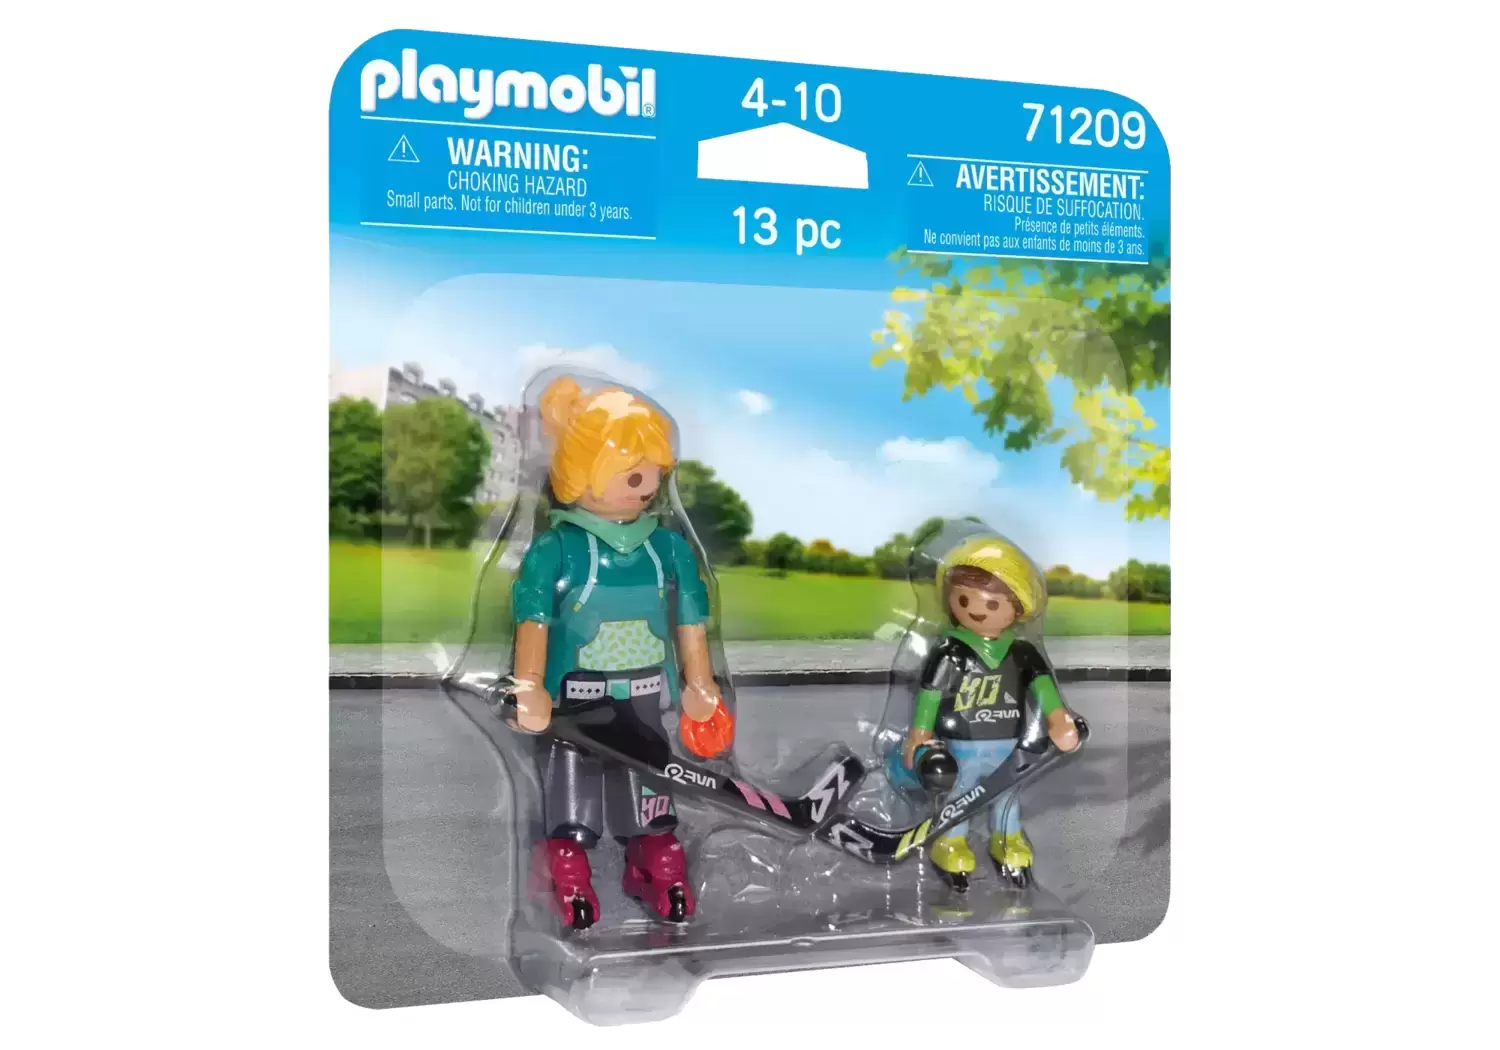 Playmobil in the City - Roller Hockey